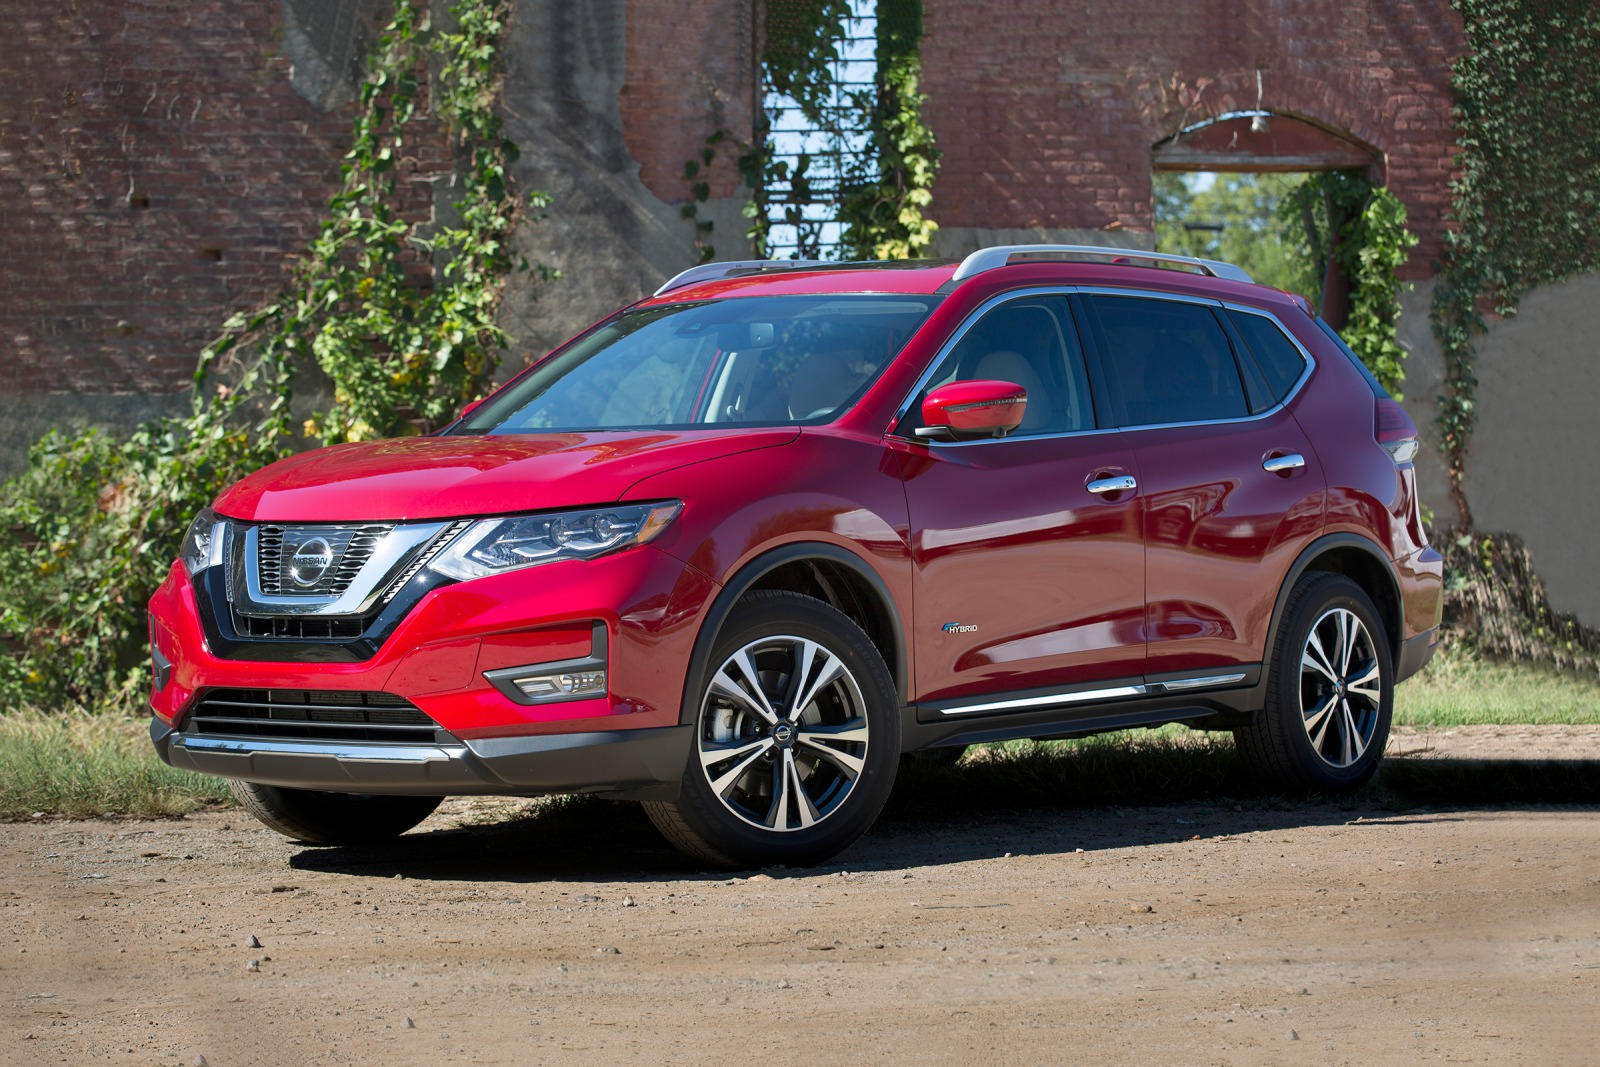 2018 Nissan Rogue Hybrid Review, Trims, Specs, Price, New Interior